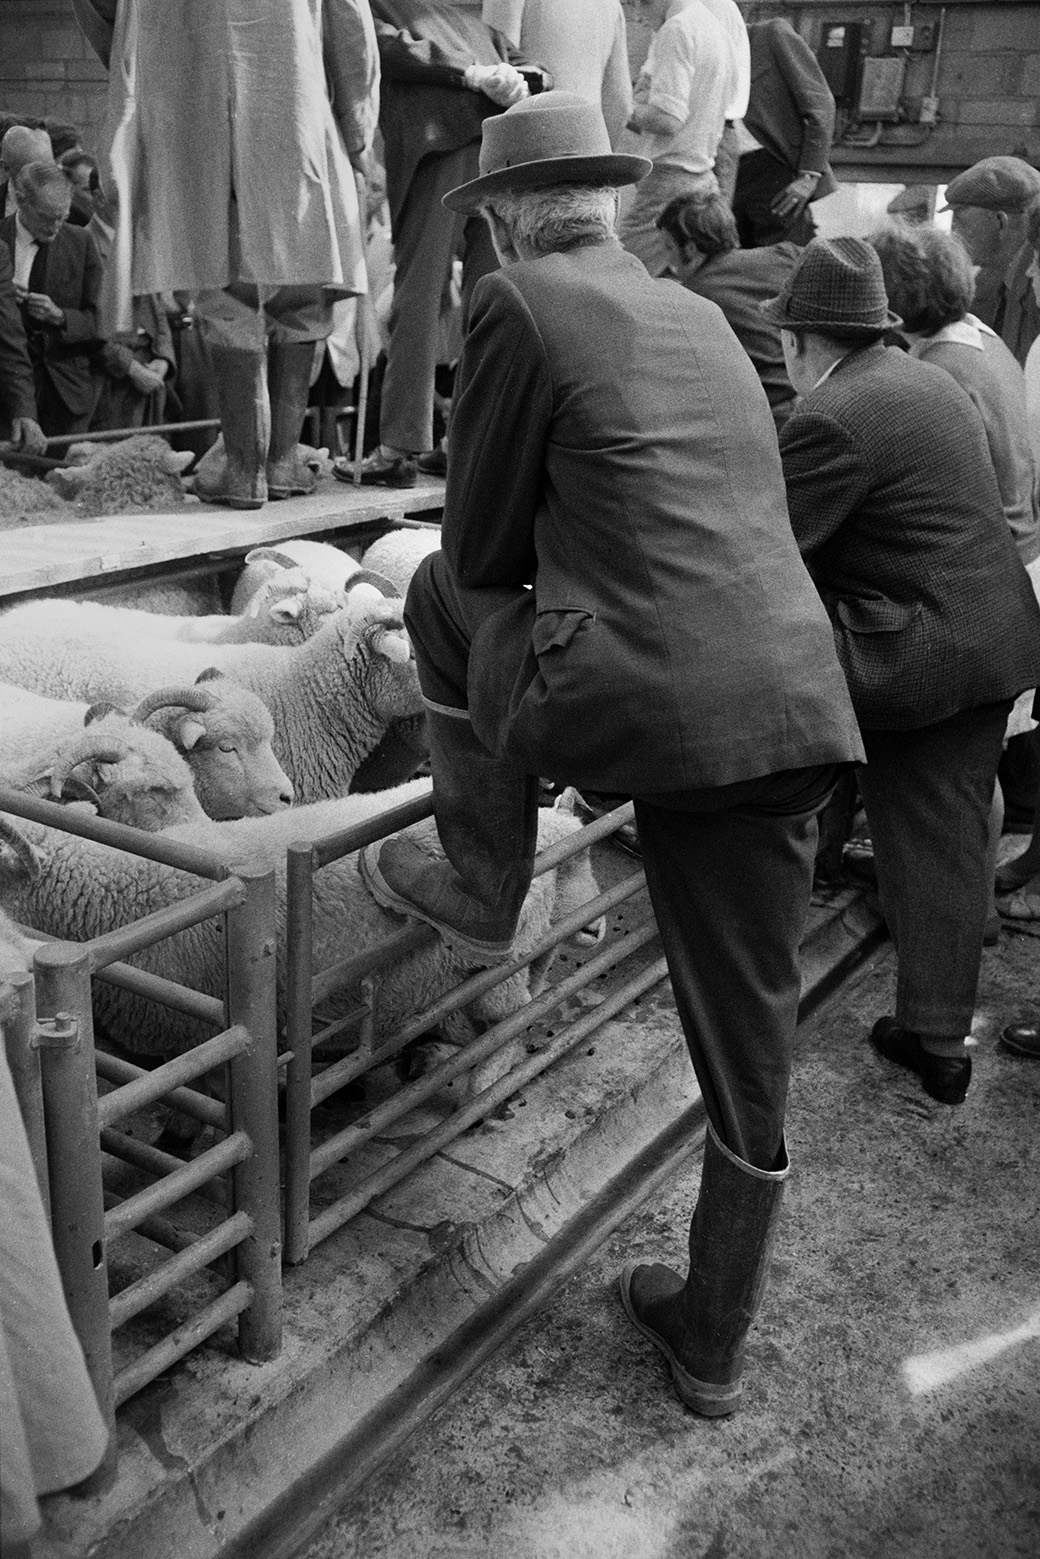 Men looking at sheep in pens at Hatherleigh Market. Some men, possibly auctioneers, are stood on boards above the pens.